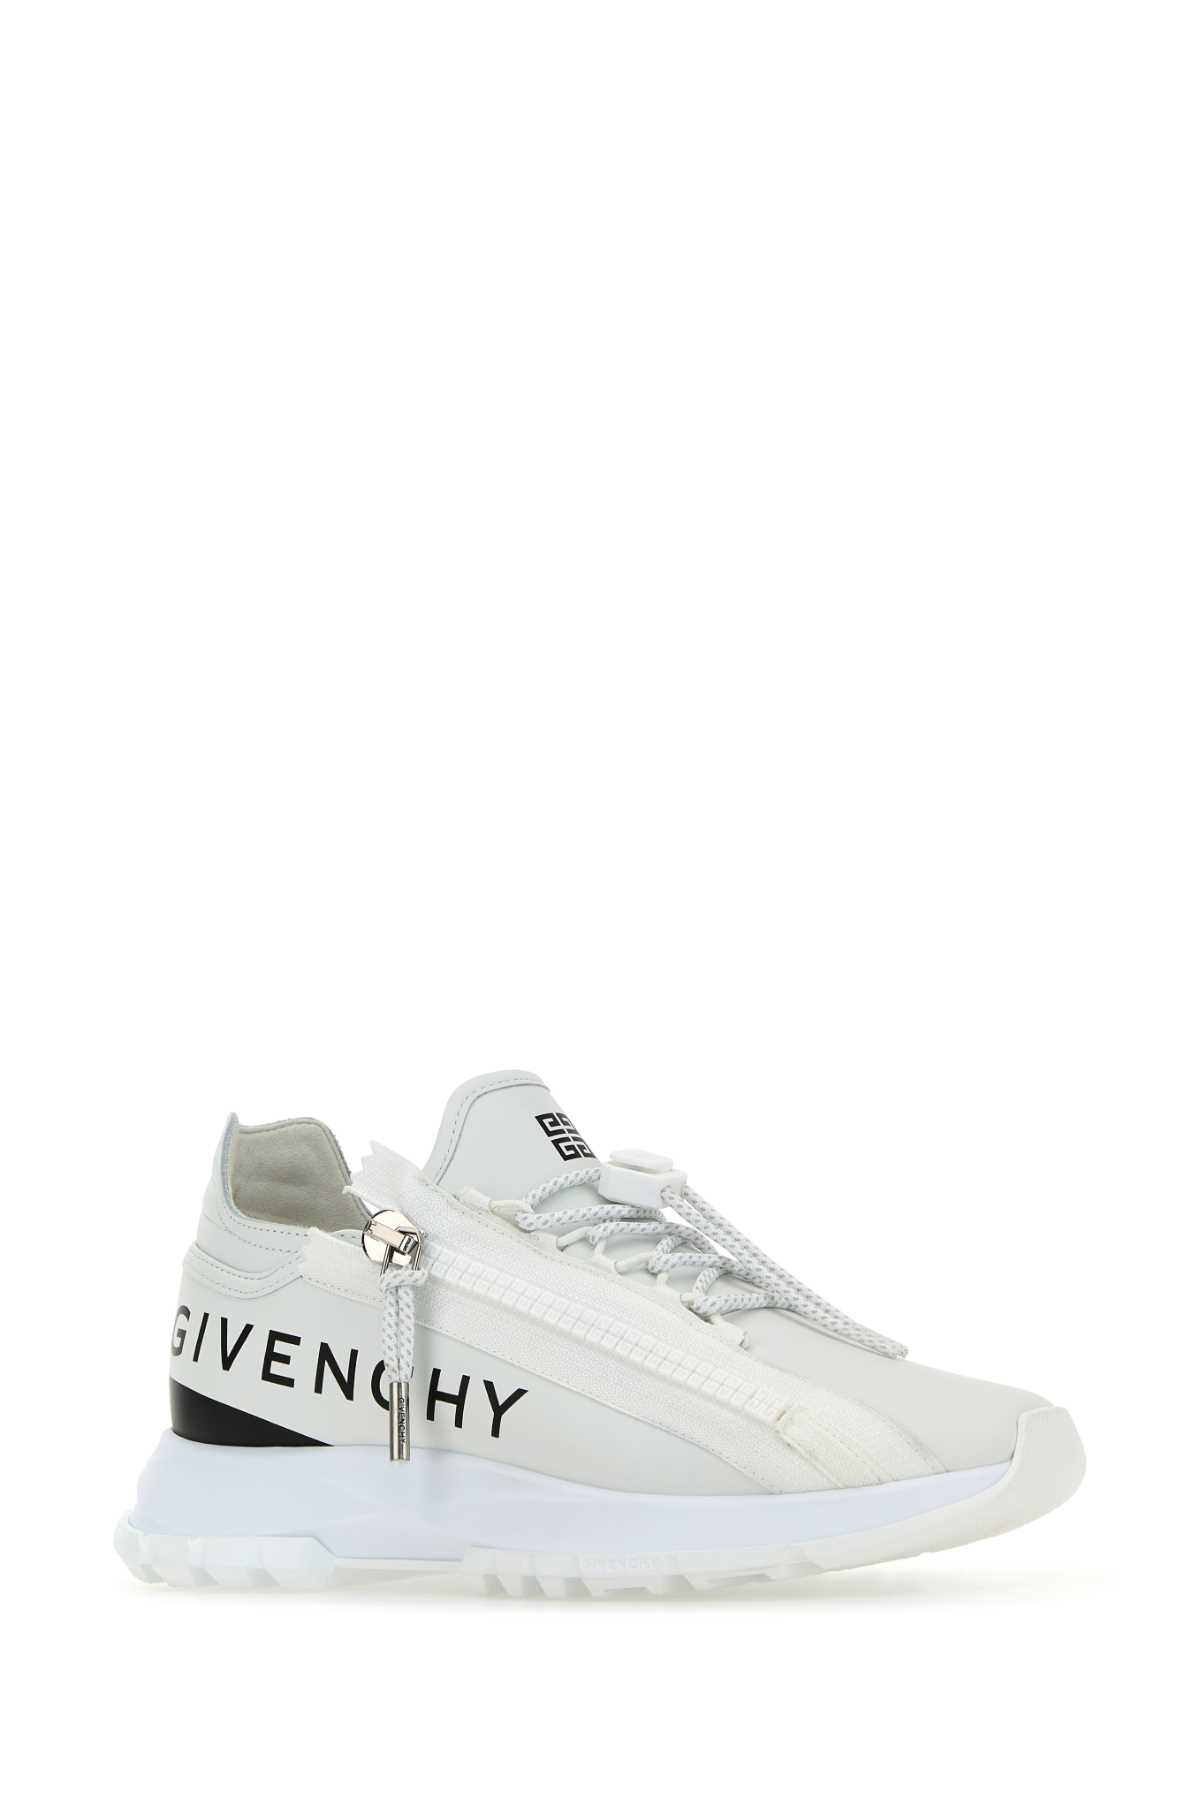 Givenchy White Leather Spectre Sneakers In 116-white/black